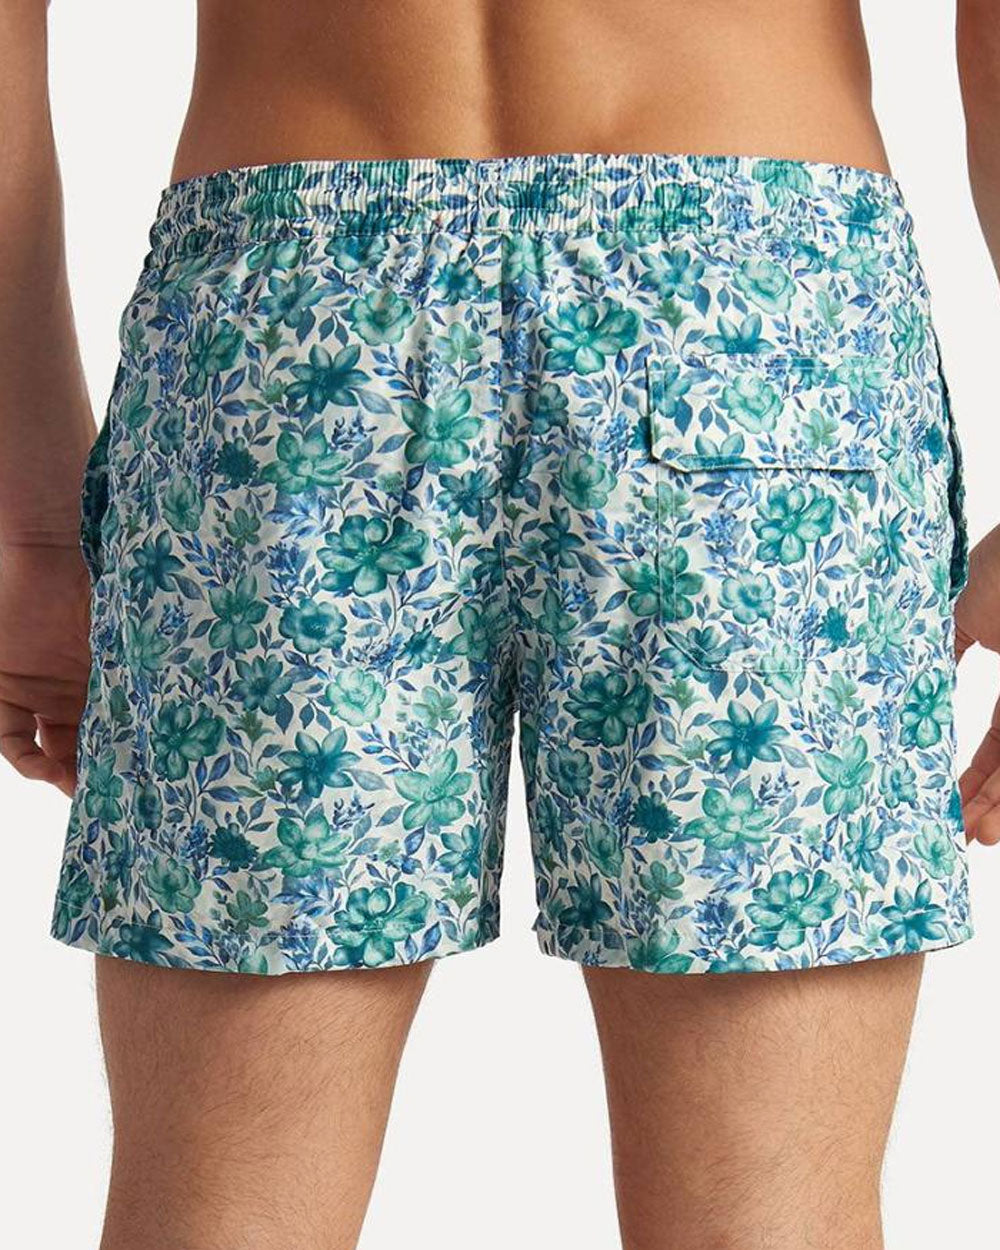 Blue and Green Floral Swim Short